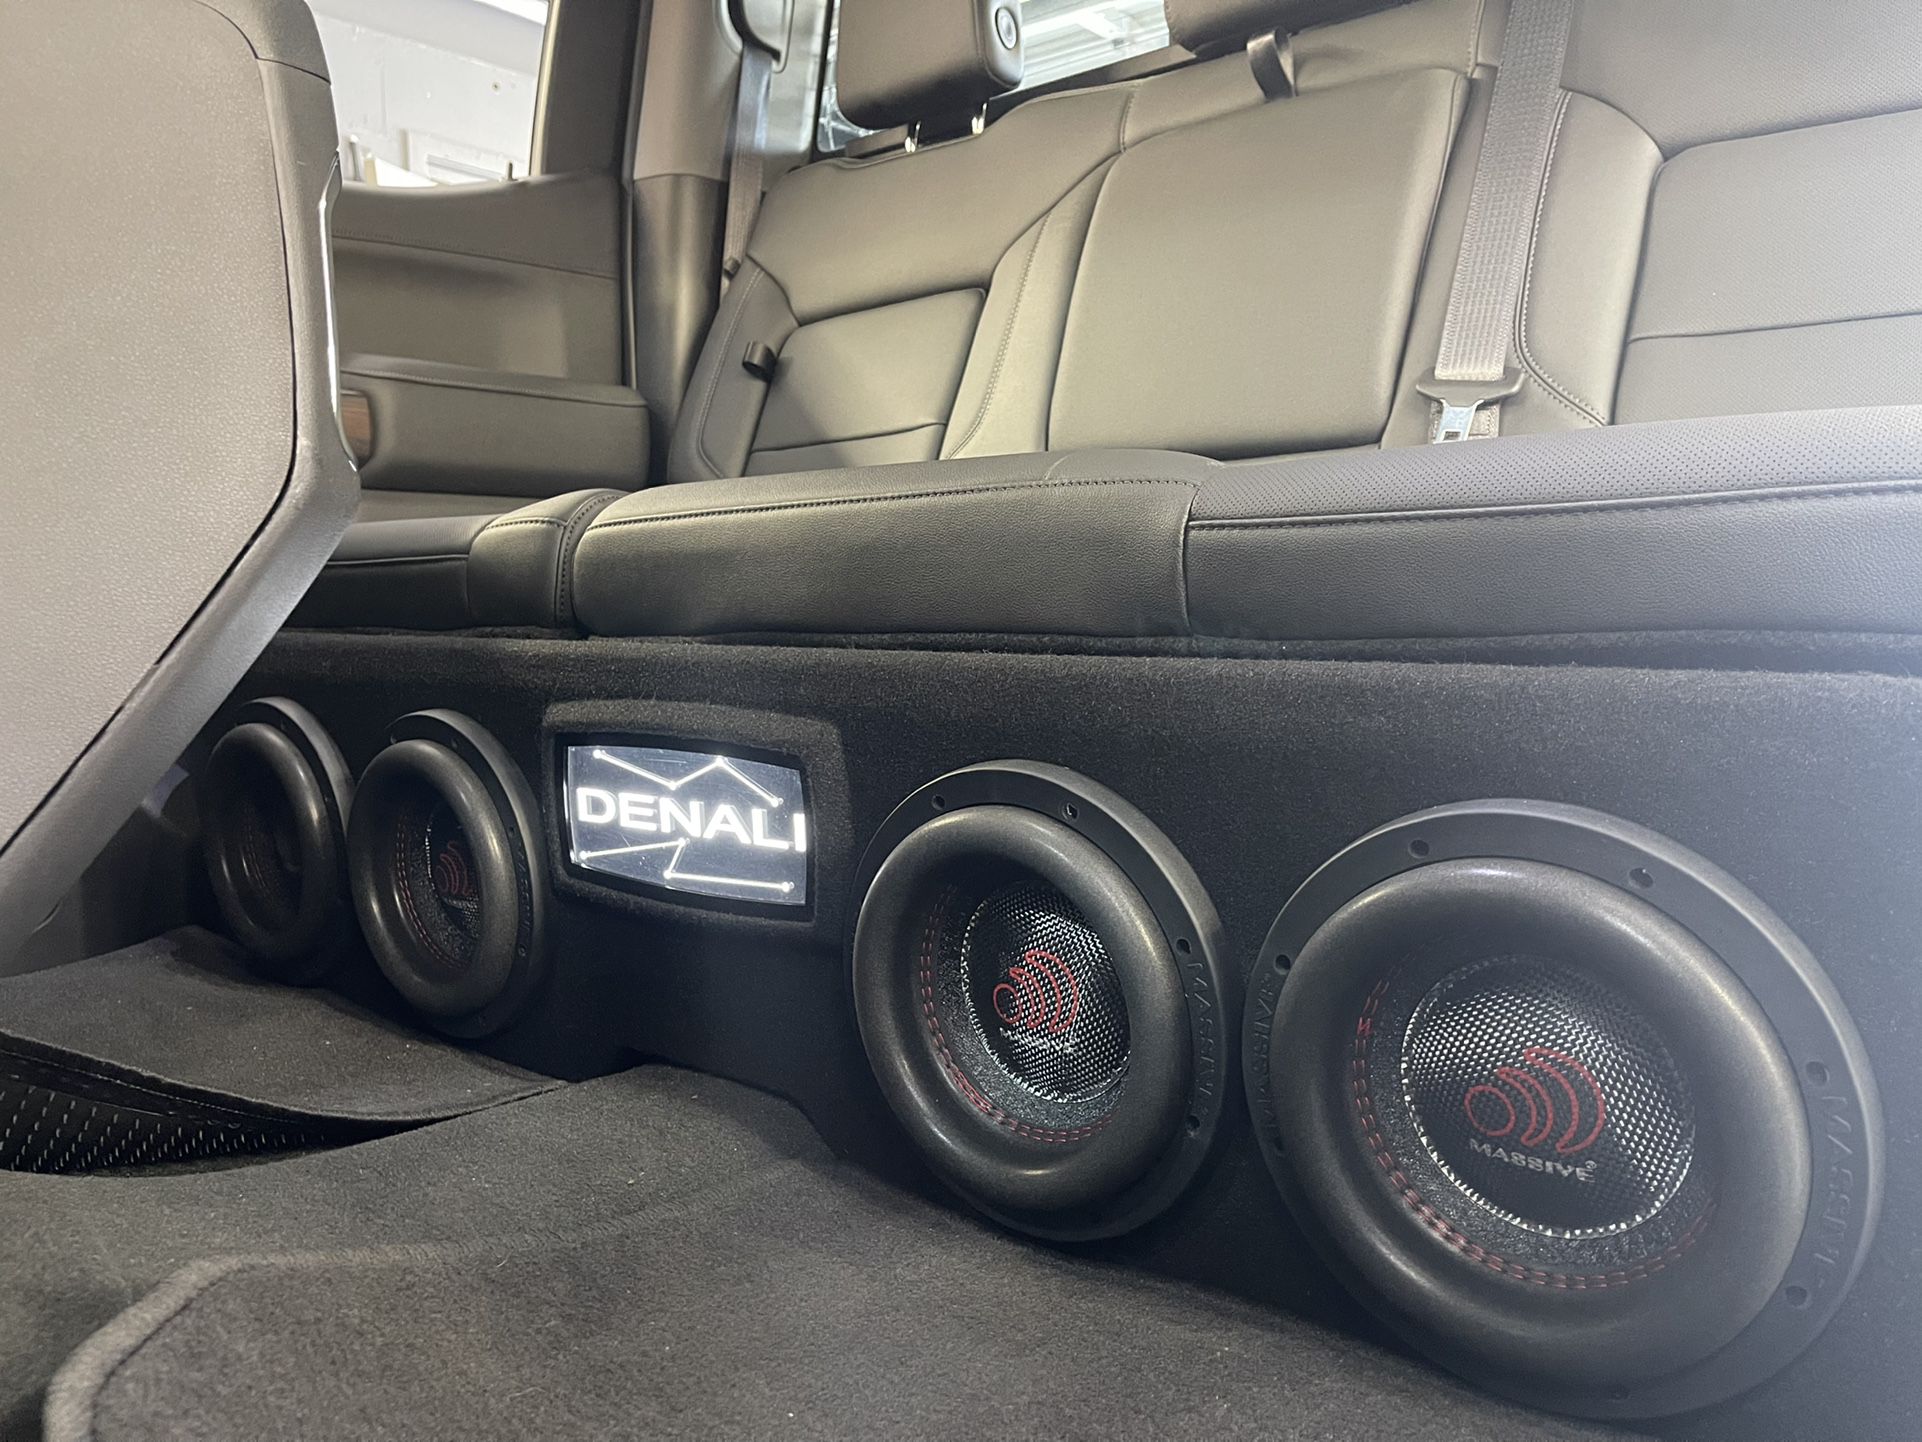 Sound system with installation “FINANCING AVAILABLE NO CREDIT CHECK” car/truck audio si Español 